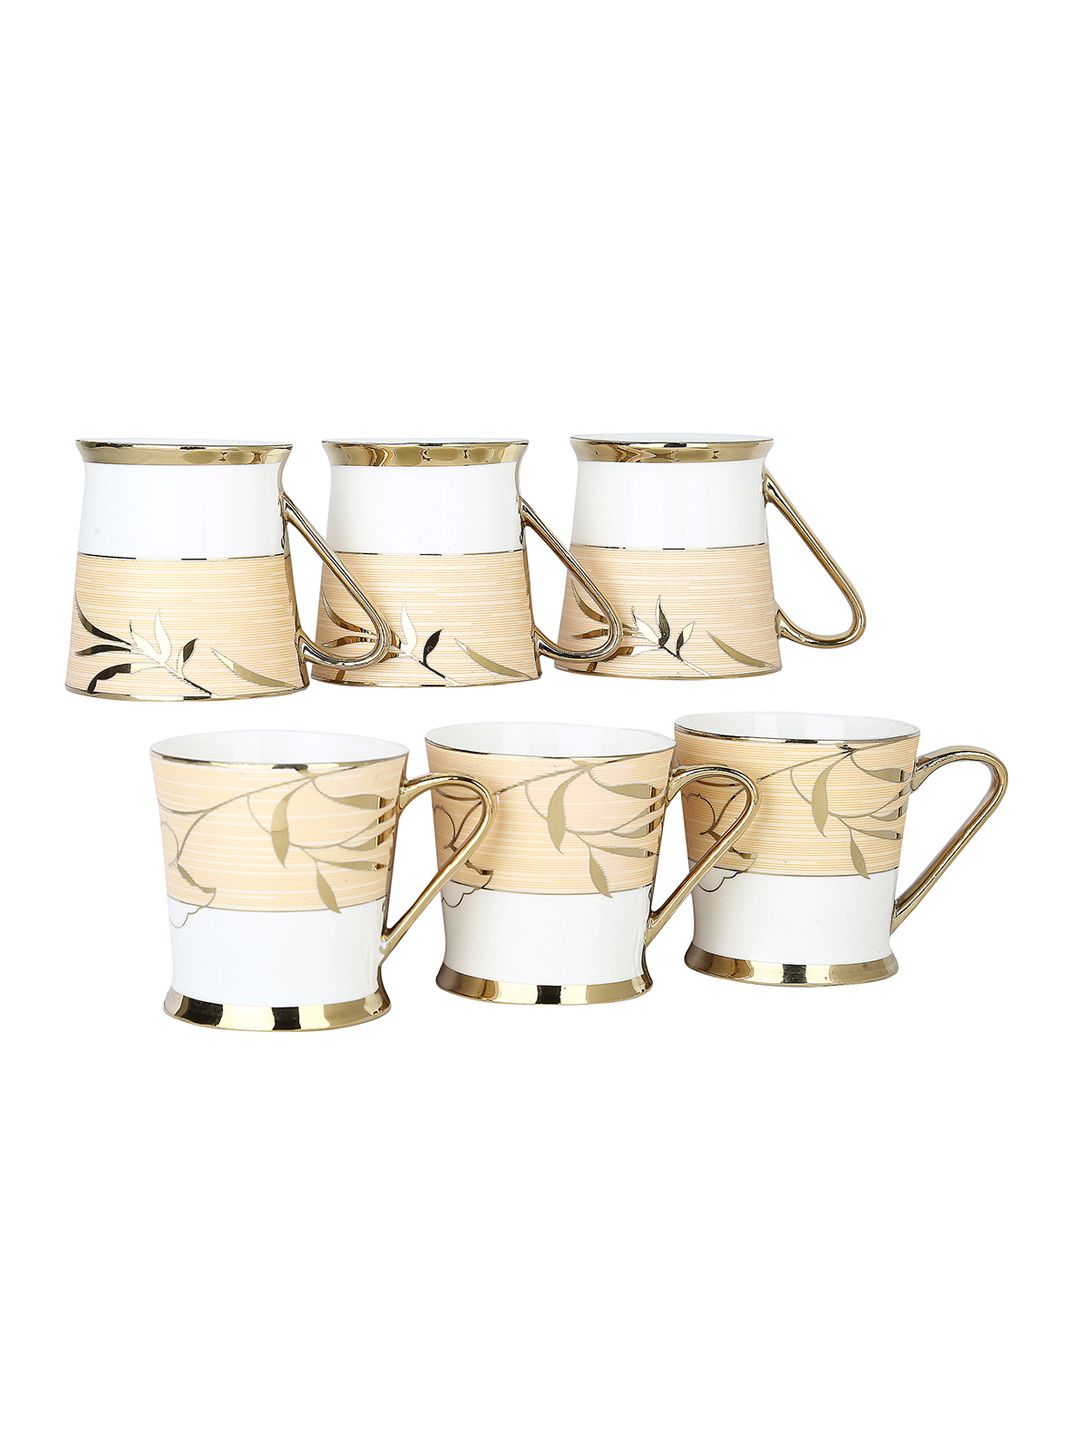 Femora Set of 6 White & Gold-Toned Cups Price in India